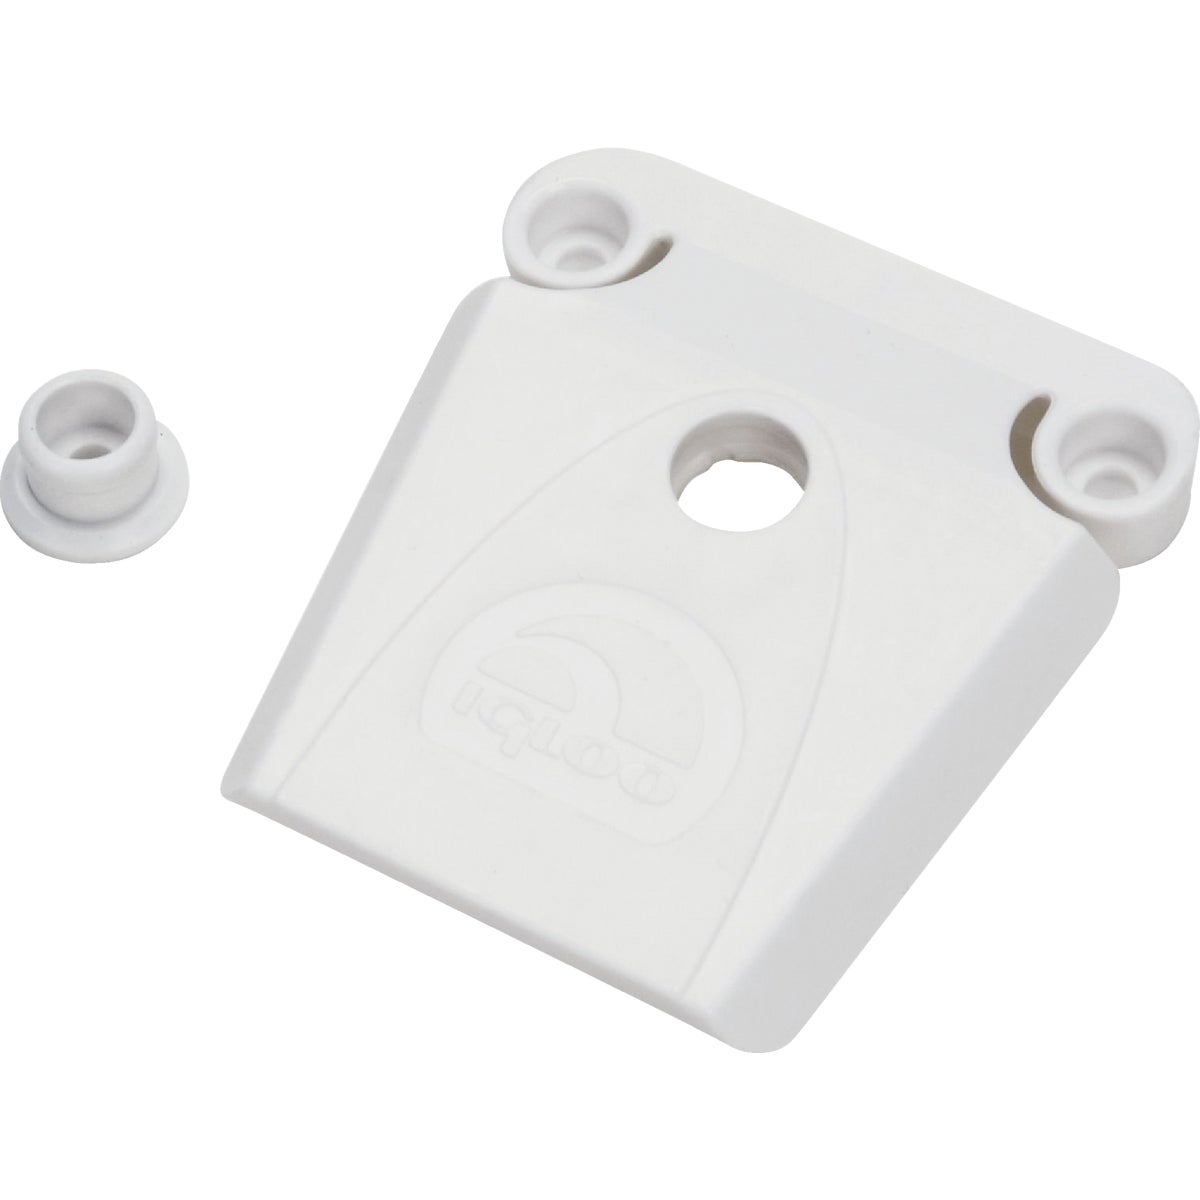 Item 802824, Replacement cooler latch set for Igloo coolers only.